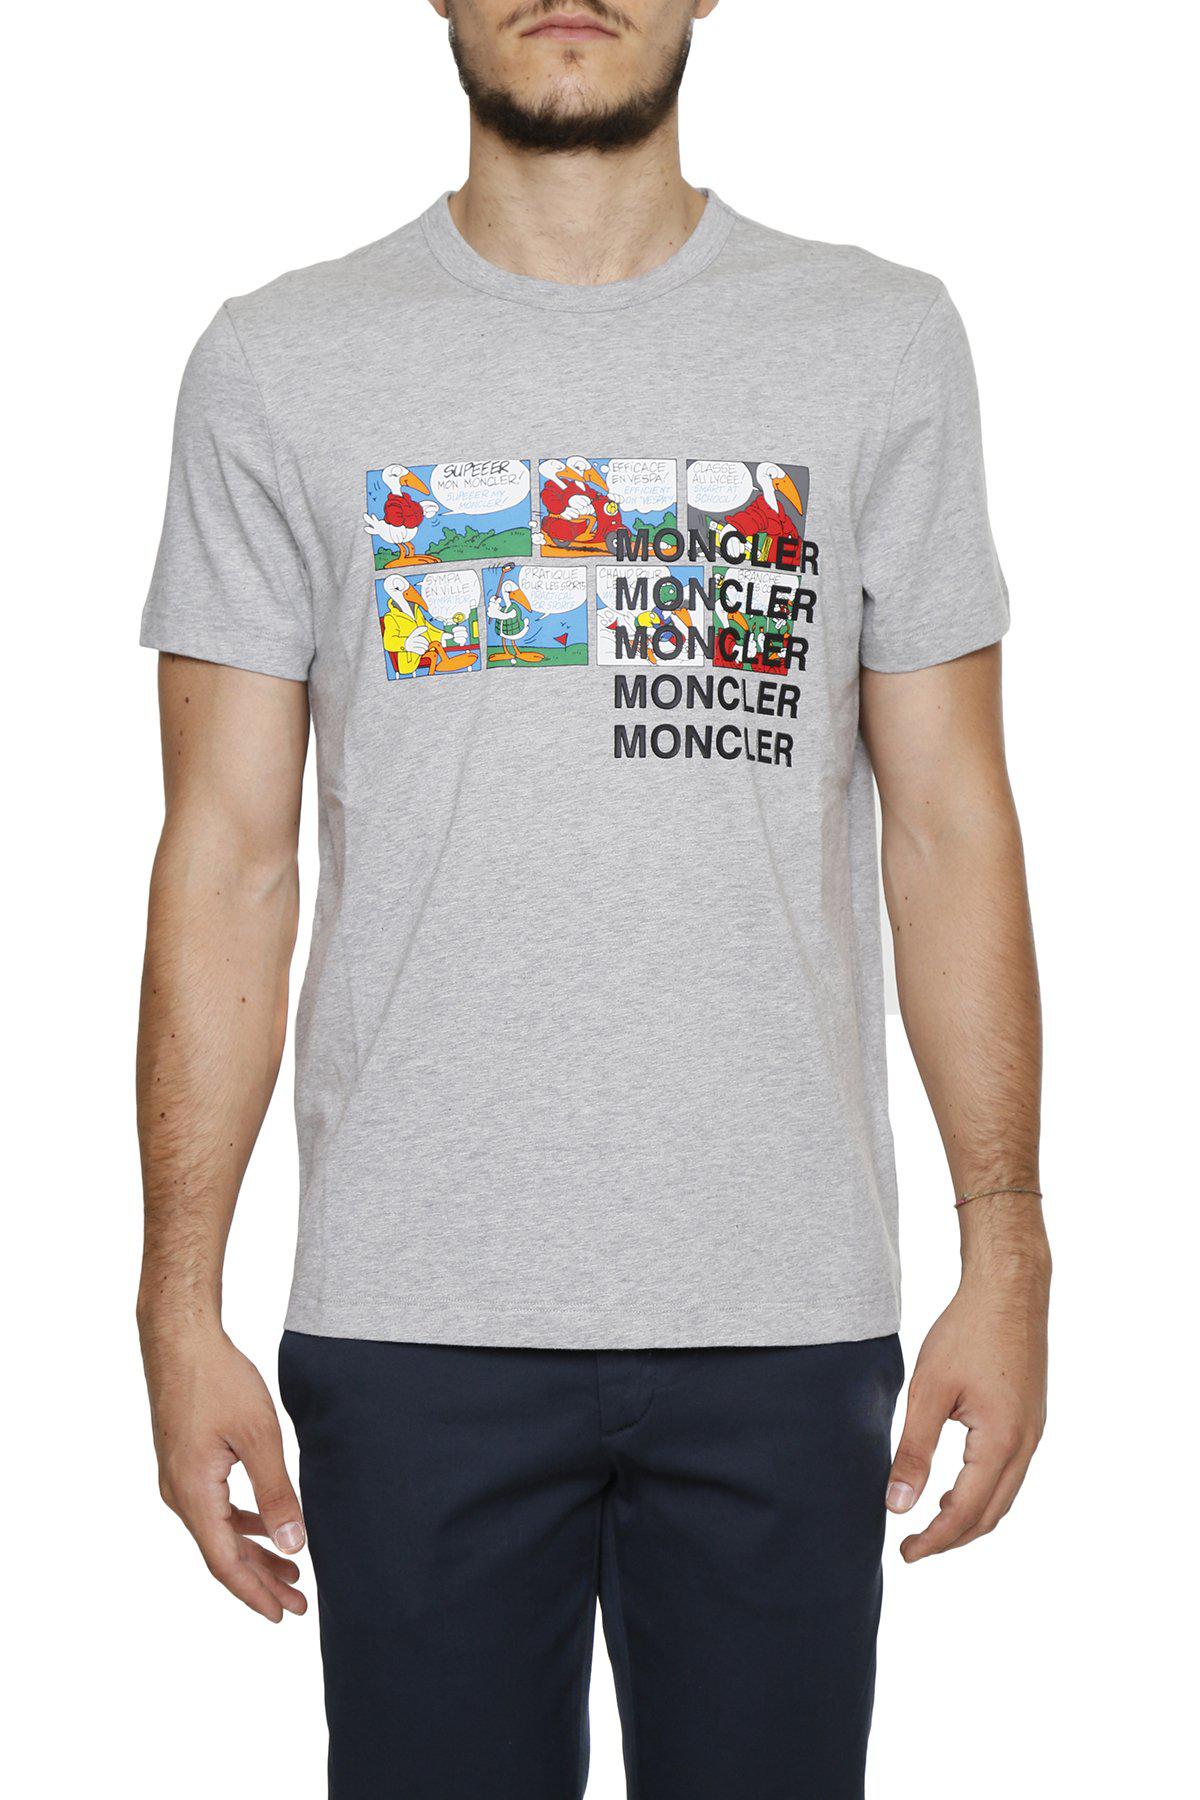 Moncler Cartoon T Shirt, Buy Now, Outlet, 57% OFF, smartkeyword.io